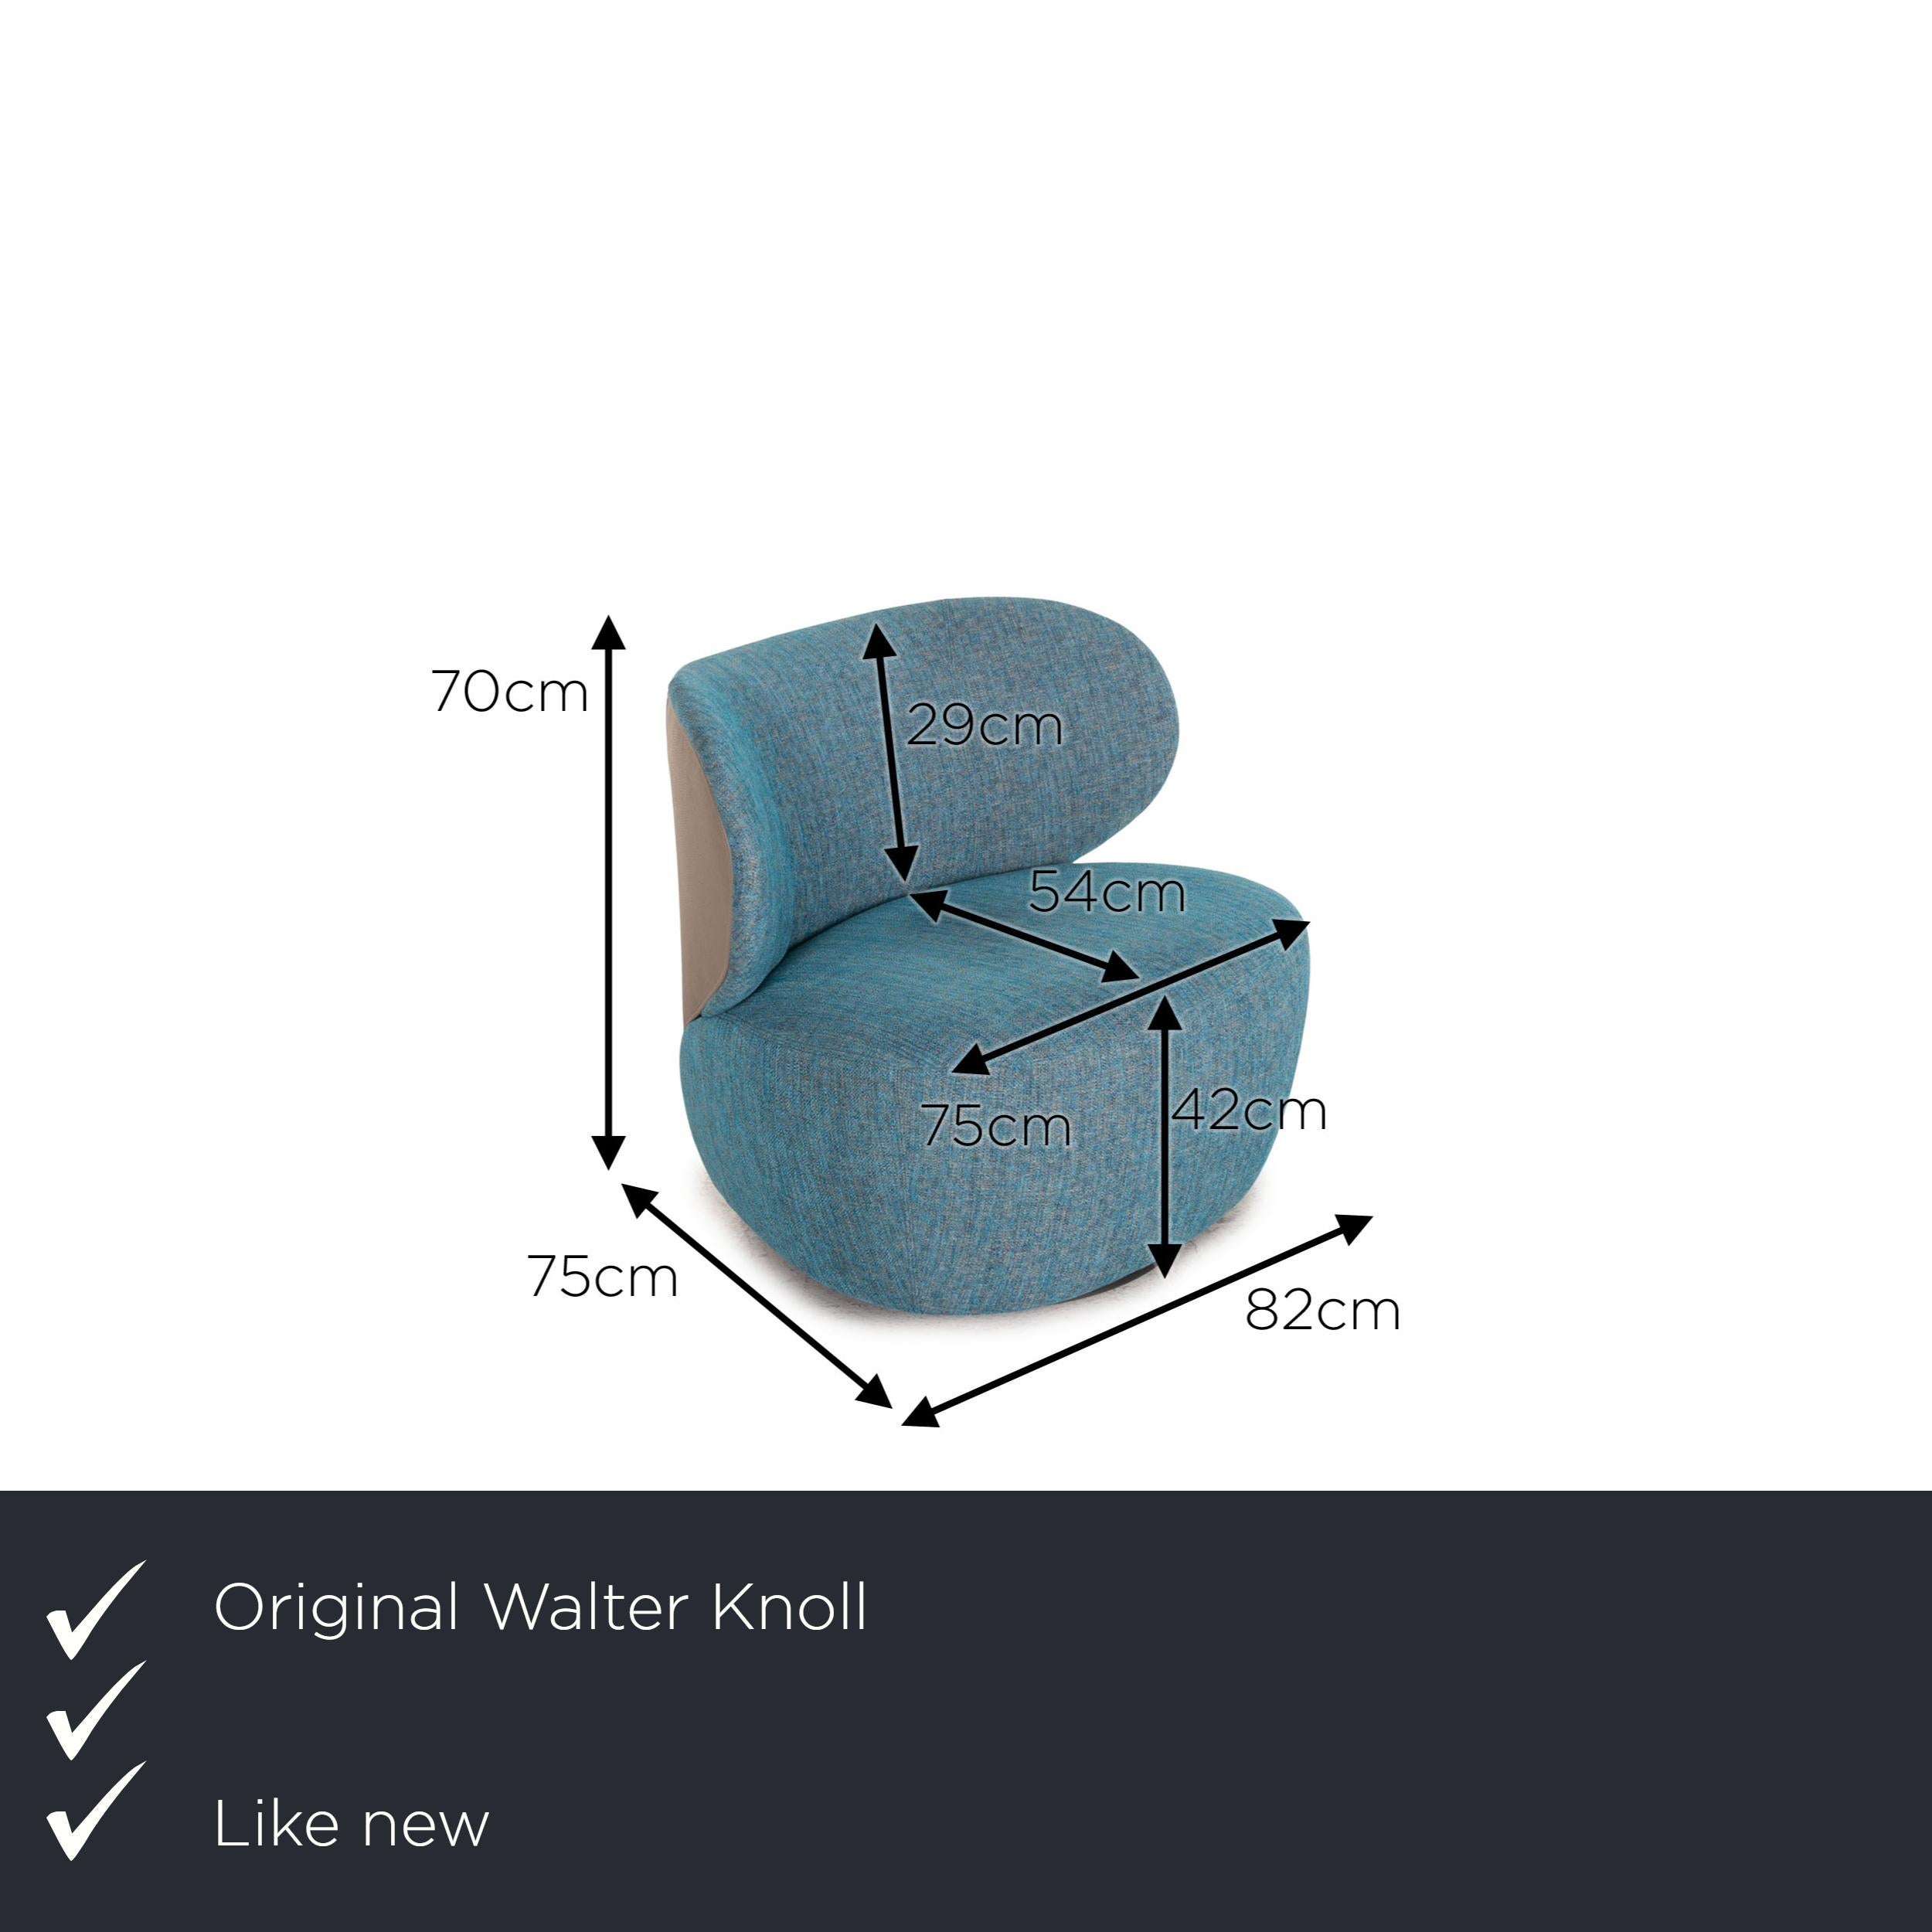 We present to you a Walter Knoll Boa fabric armchair blue.

Product measurements in centimeters:

Depth: 75
Width: 82
Height: 70
Seat height: 42
Rest height:
Seat depth: 54
Seat width: 75
Back height: 29.


    